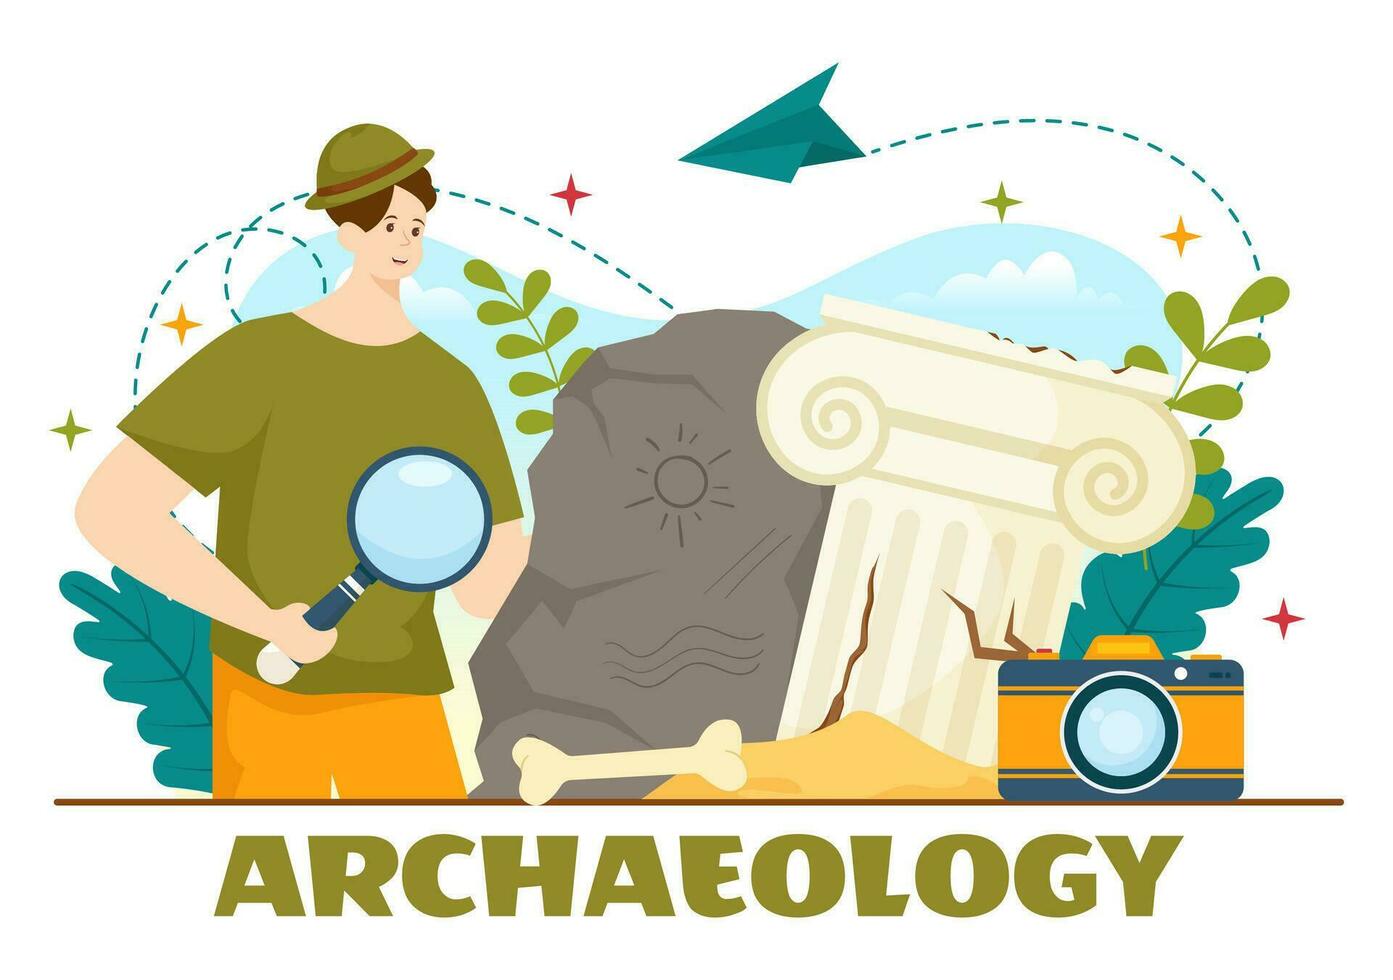 Archeology Vector Illustration with Archaeological Excavation of ancient Ruins, Artifacts and Dinosaurs Fossil in Flat Cartoon Hand Drawn Templates